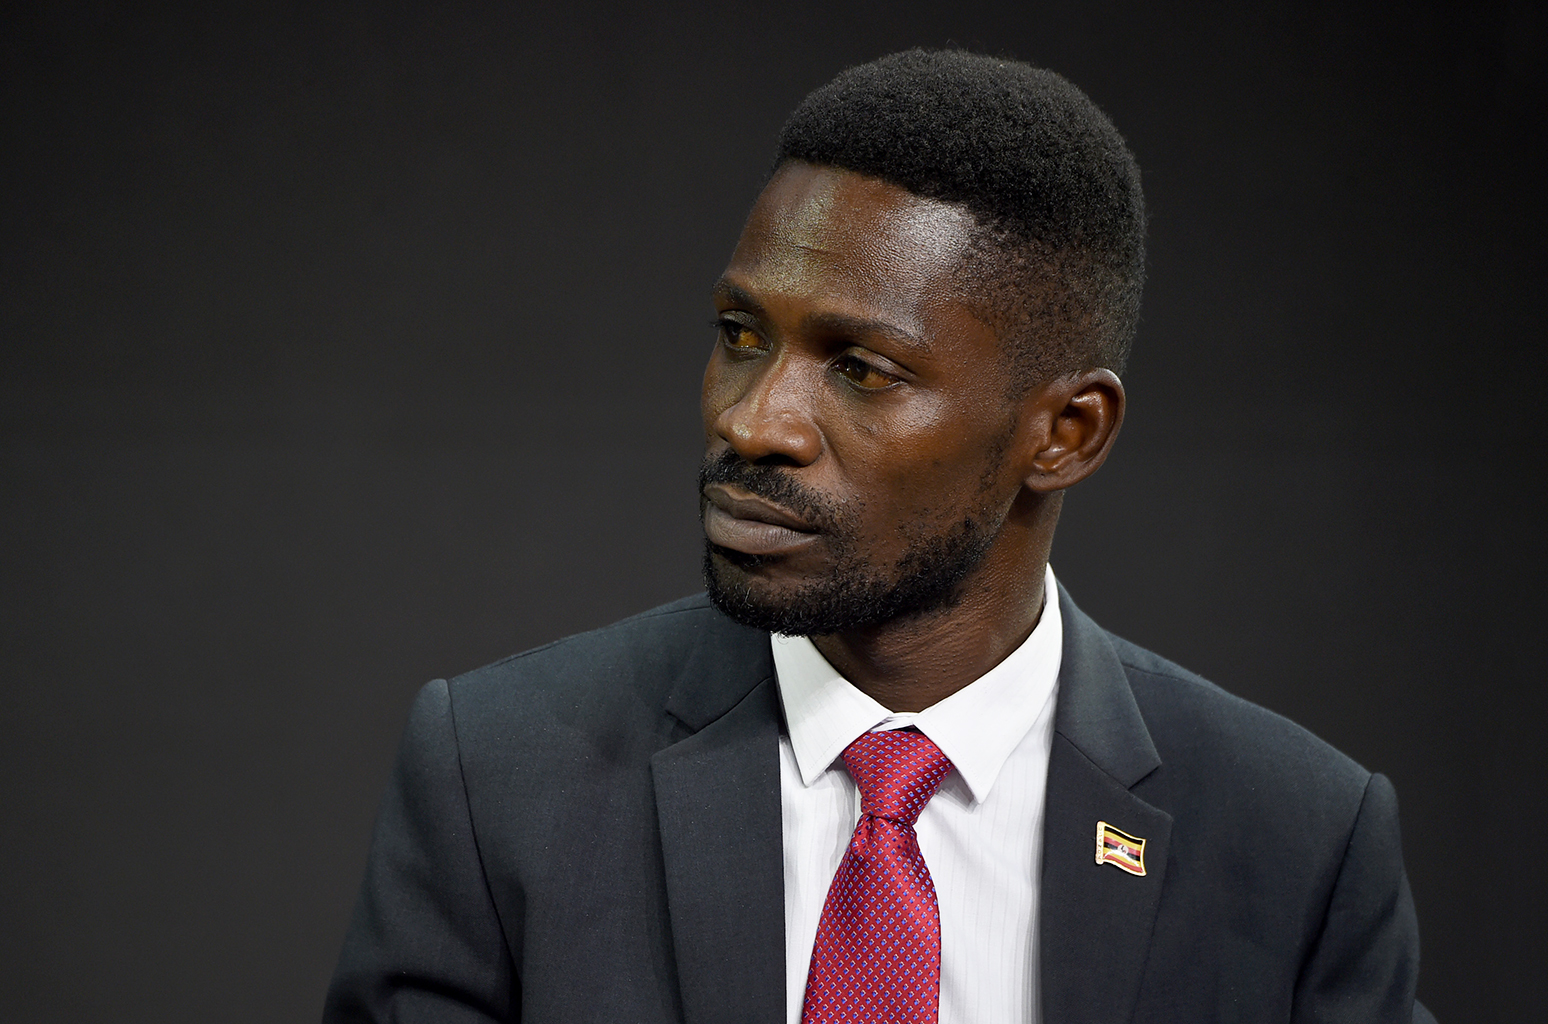 Bobi Wine launches an attack on Pastor Bugingo in somewhat cryptic message, calls him a false prophet.